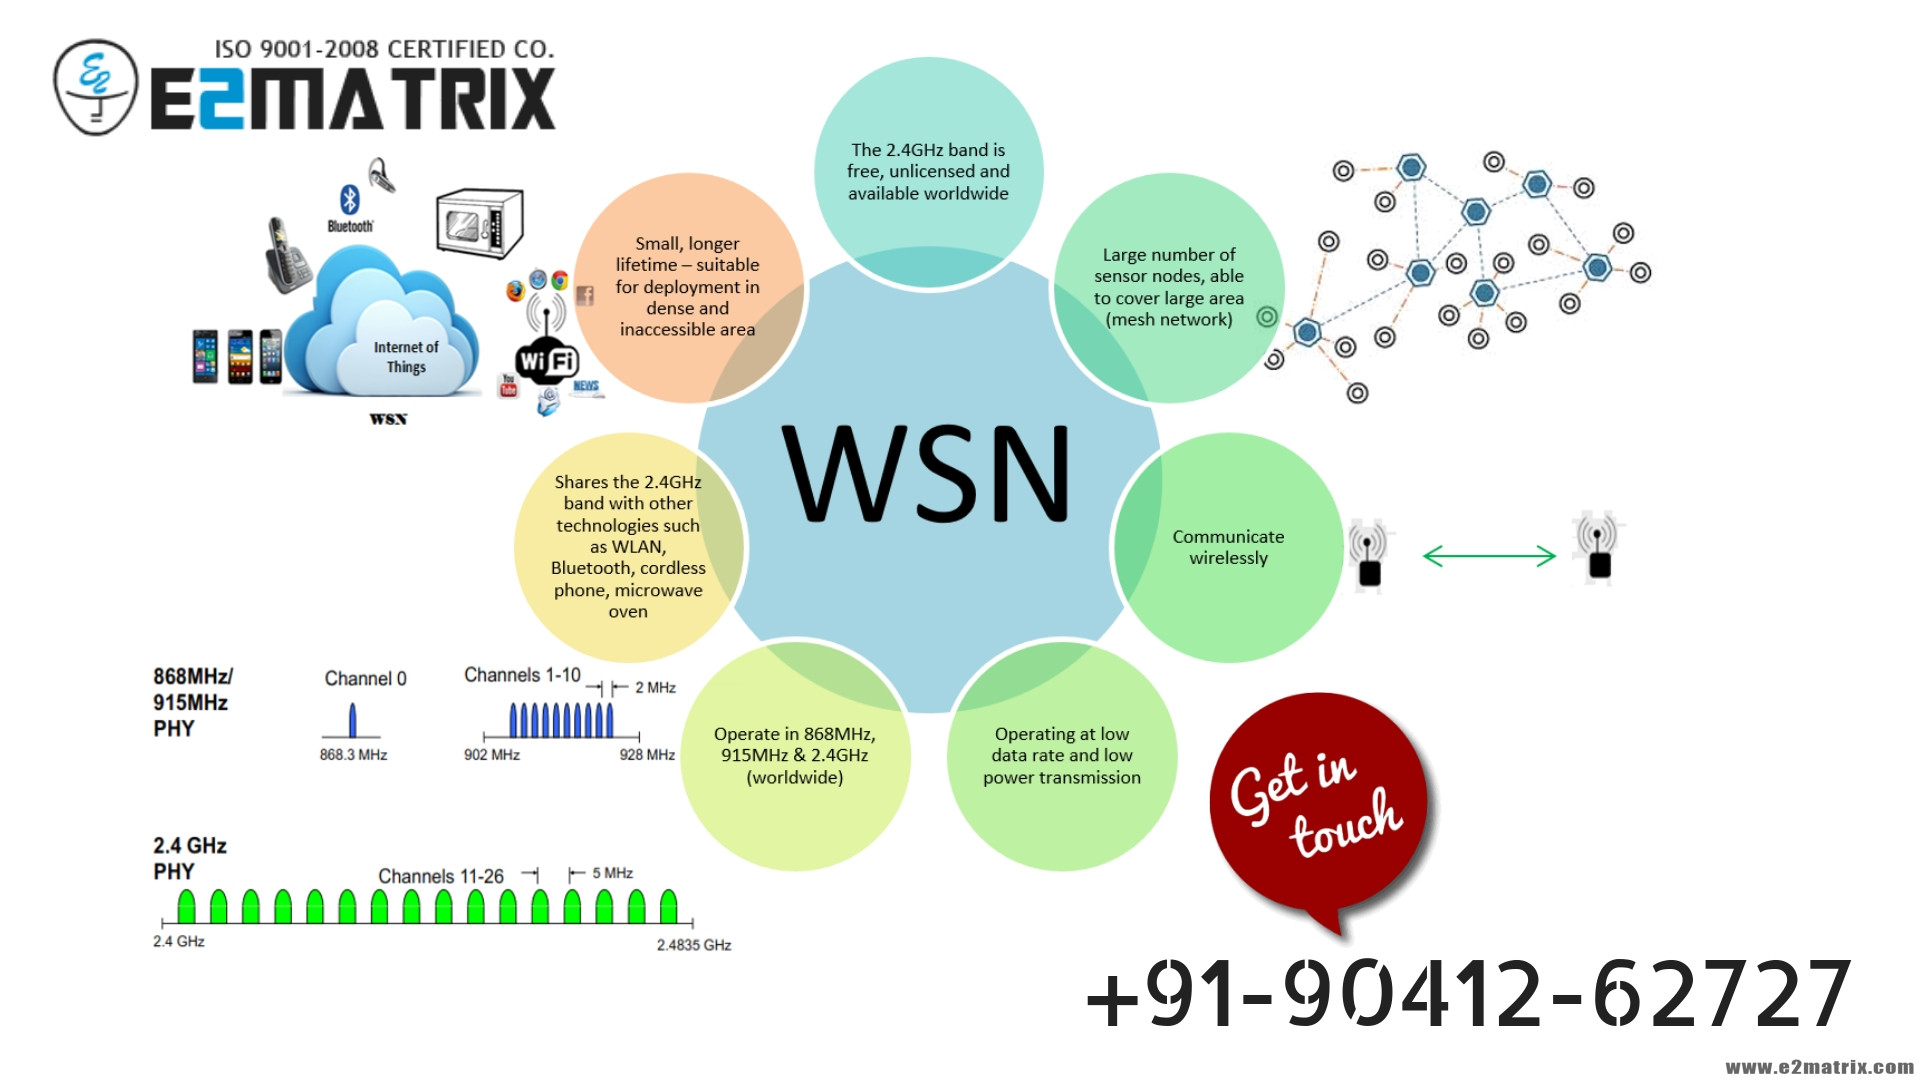 Wireless Sensor Network (WSN) thesis topics help and Research Guidance -  E2MATRIX RESEARCH LAB